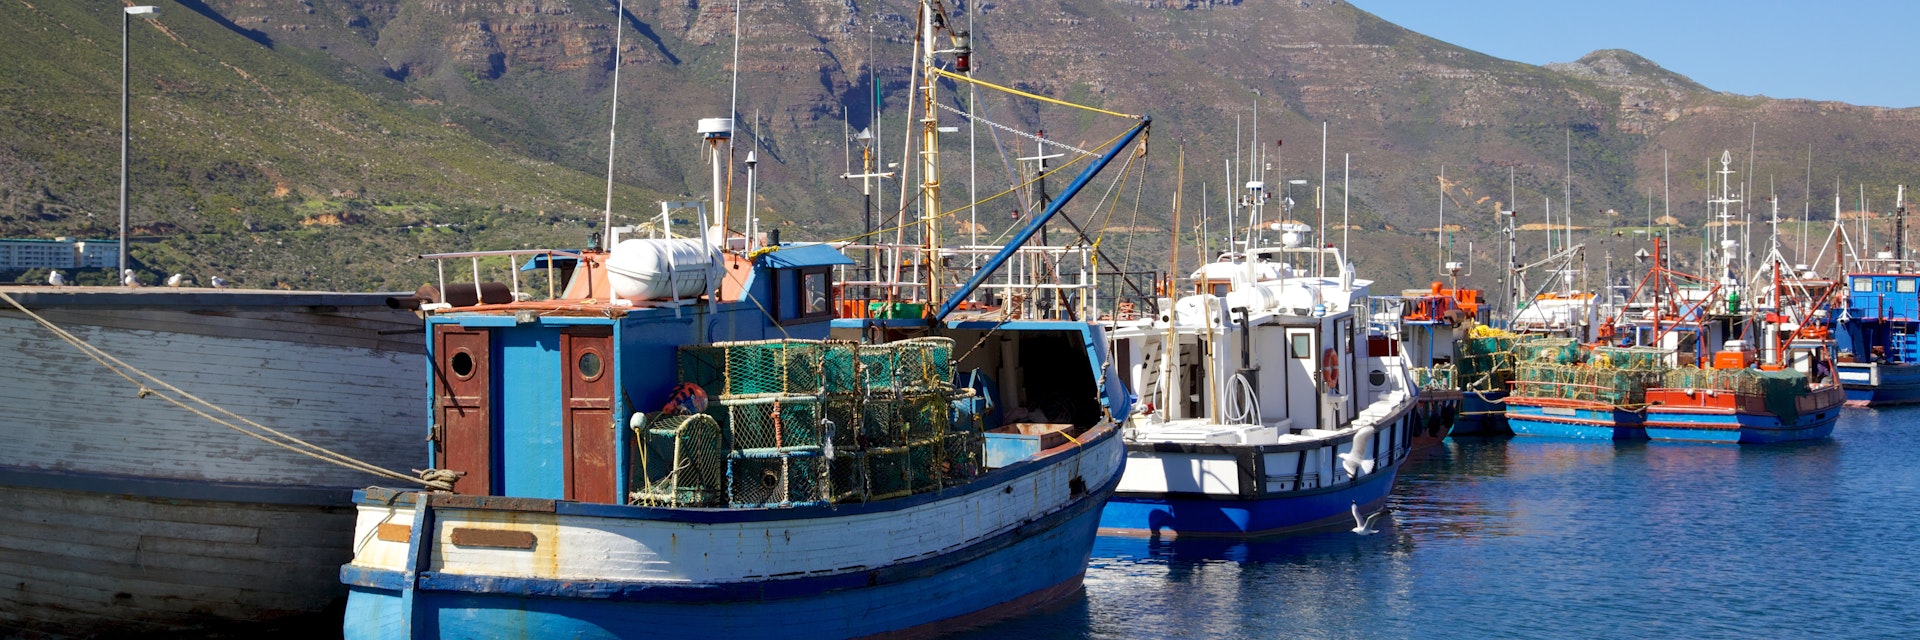 Fishing boats and Cape Fur Seals in Hout Bay Harbour, near Cape Town, South Africa. 